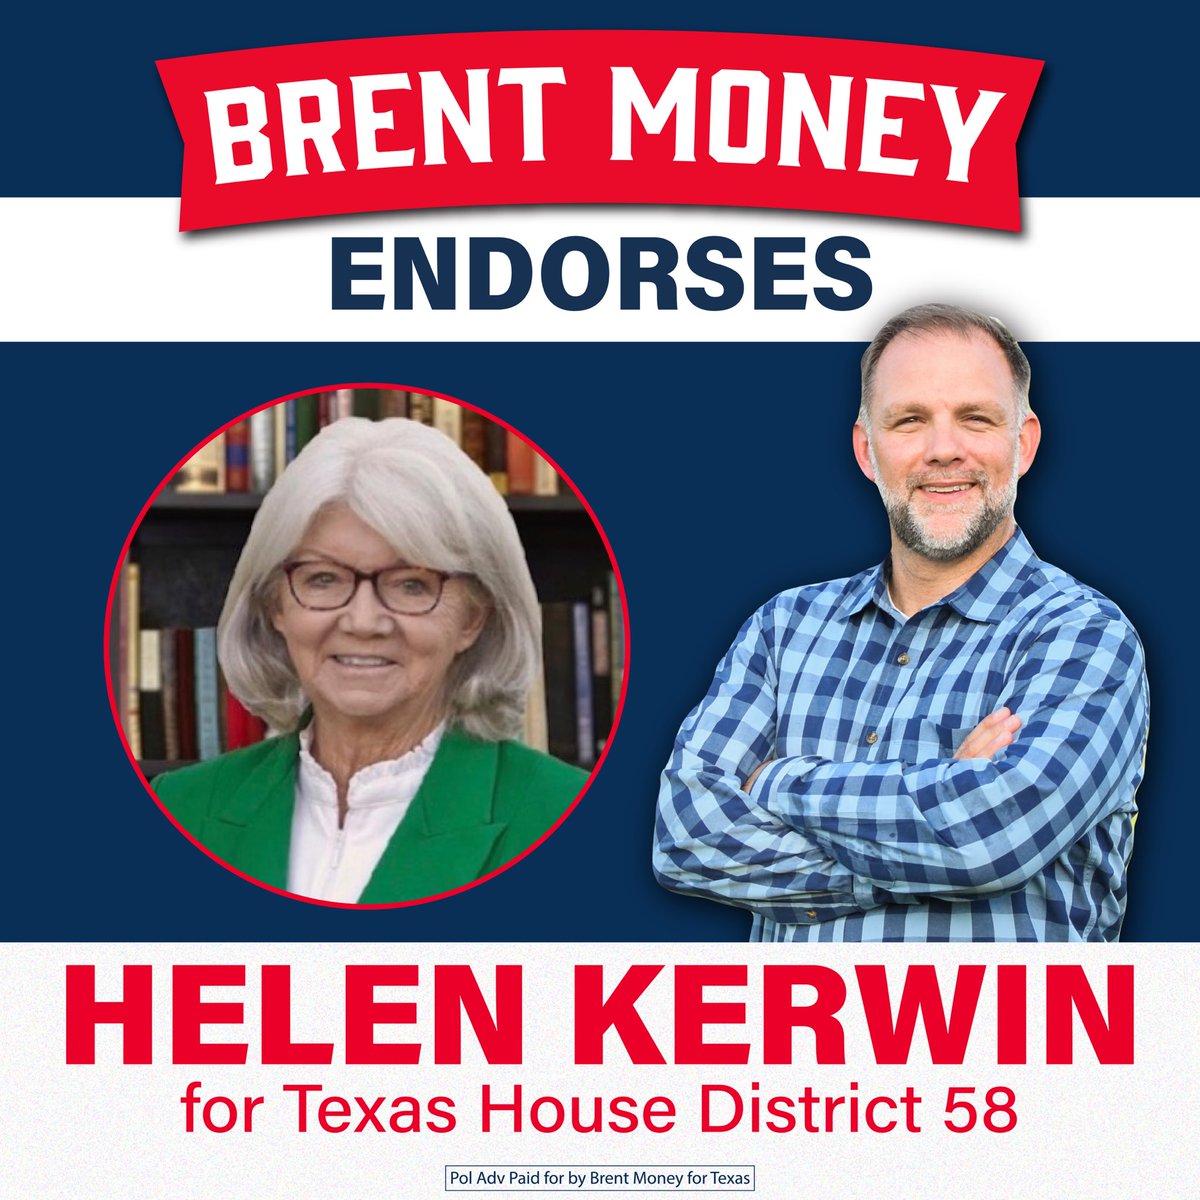 I’m happy to endorse @HelenKerwin4TX, who has signed the #ContractWithTexas! She will help reform the Texas House so that we can deliver border security, election integrity, and educational freedom to the people of Texas!